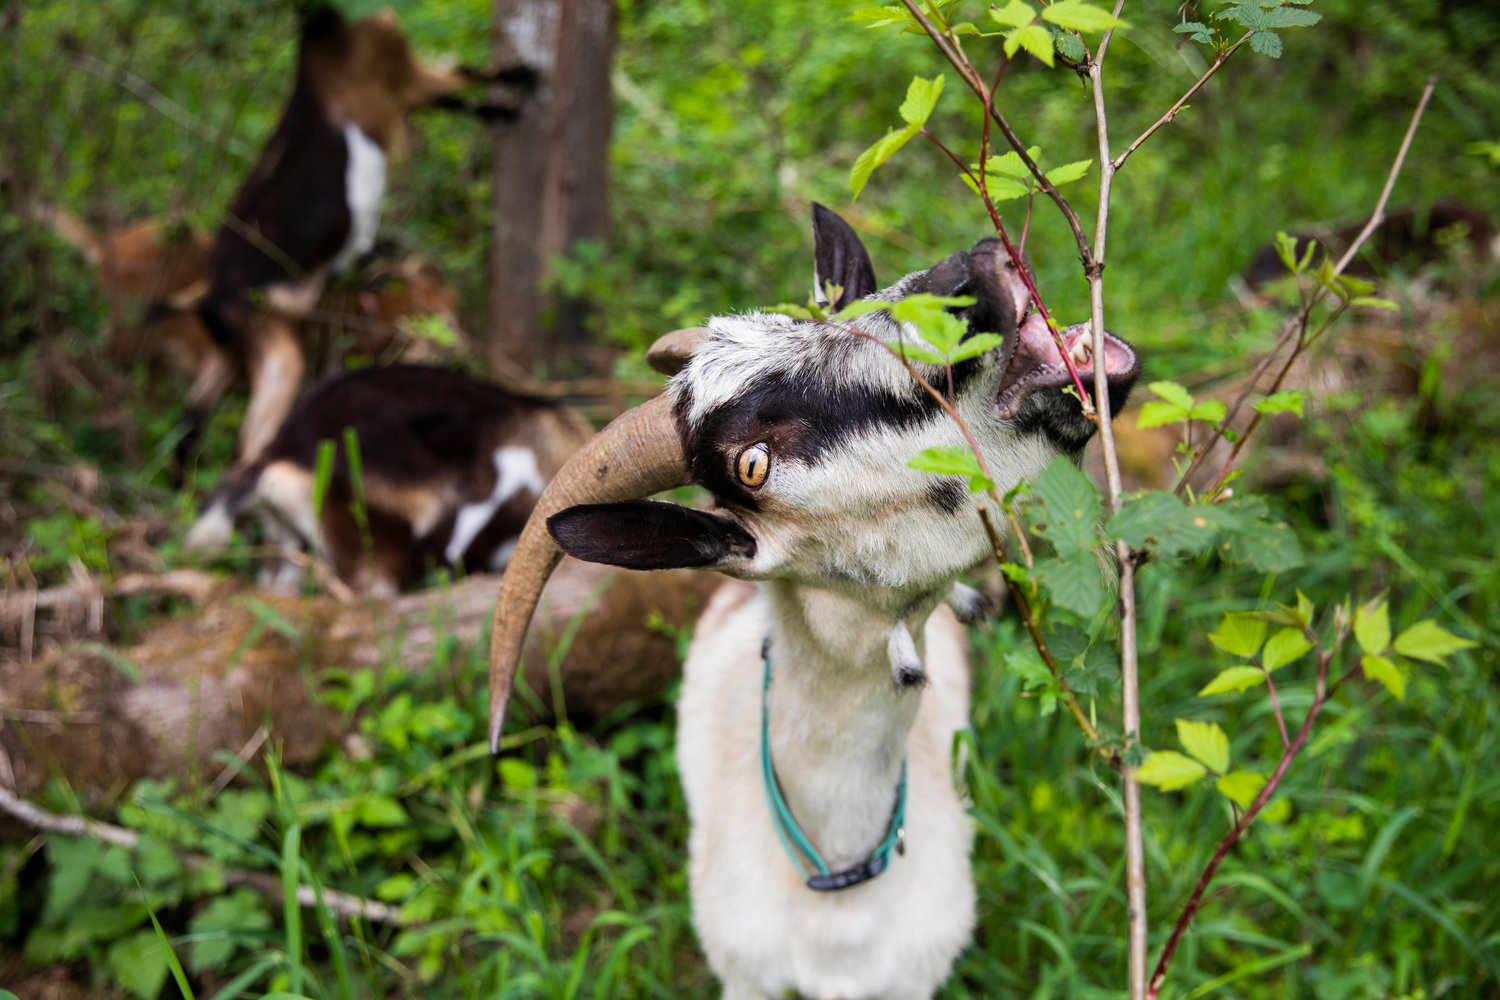 Goats stop to munch on branches during a walk near Toledo.